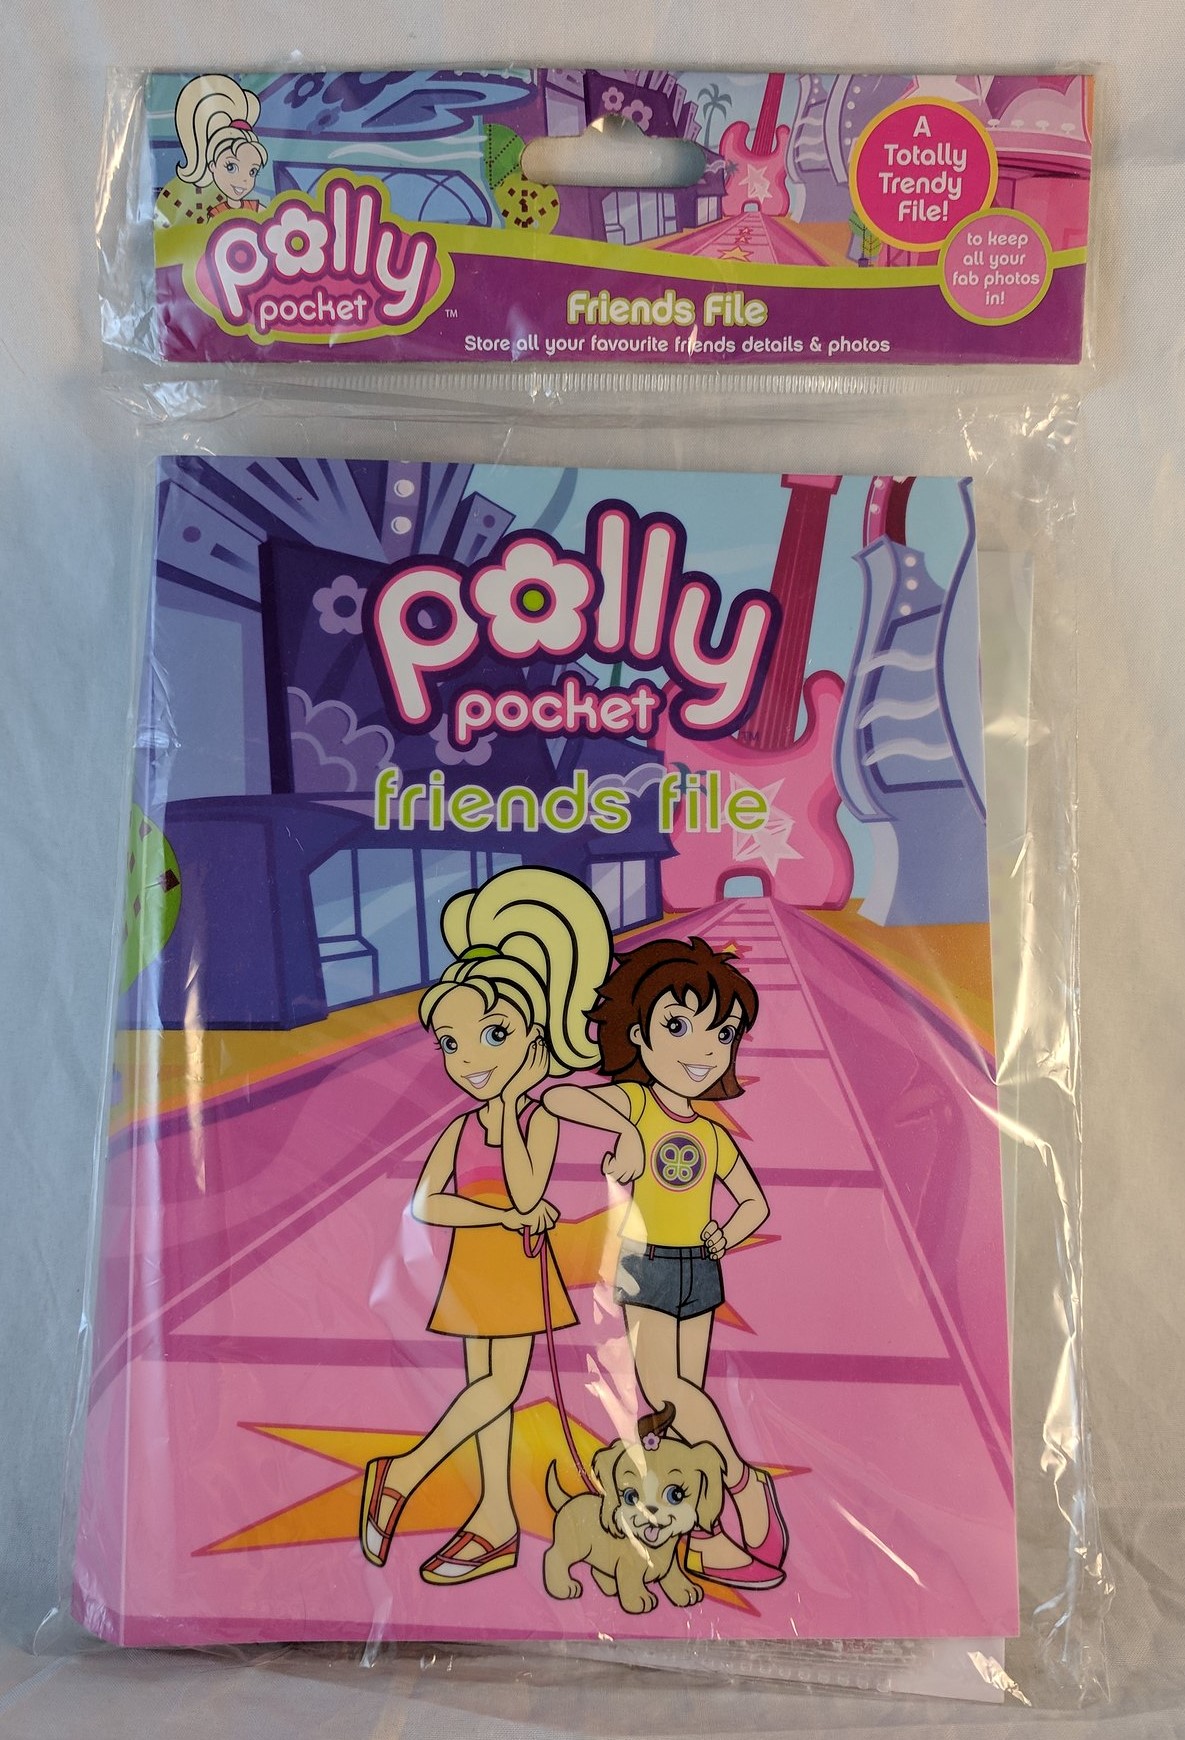 Polly Pocket - 2004 Fashion Beach Game, Brand New In Box. Nice